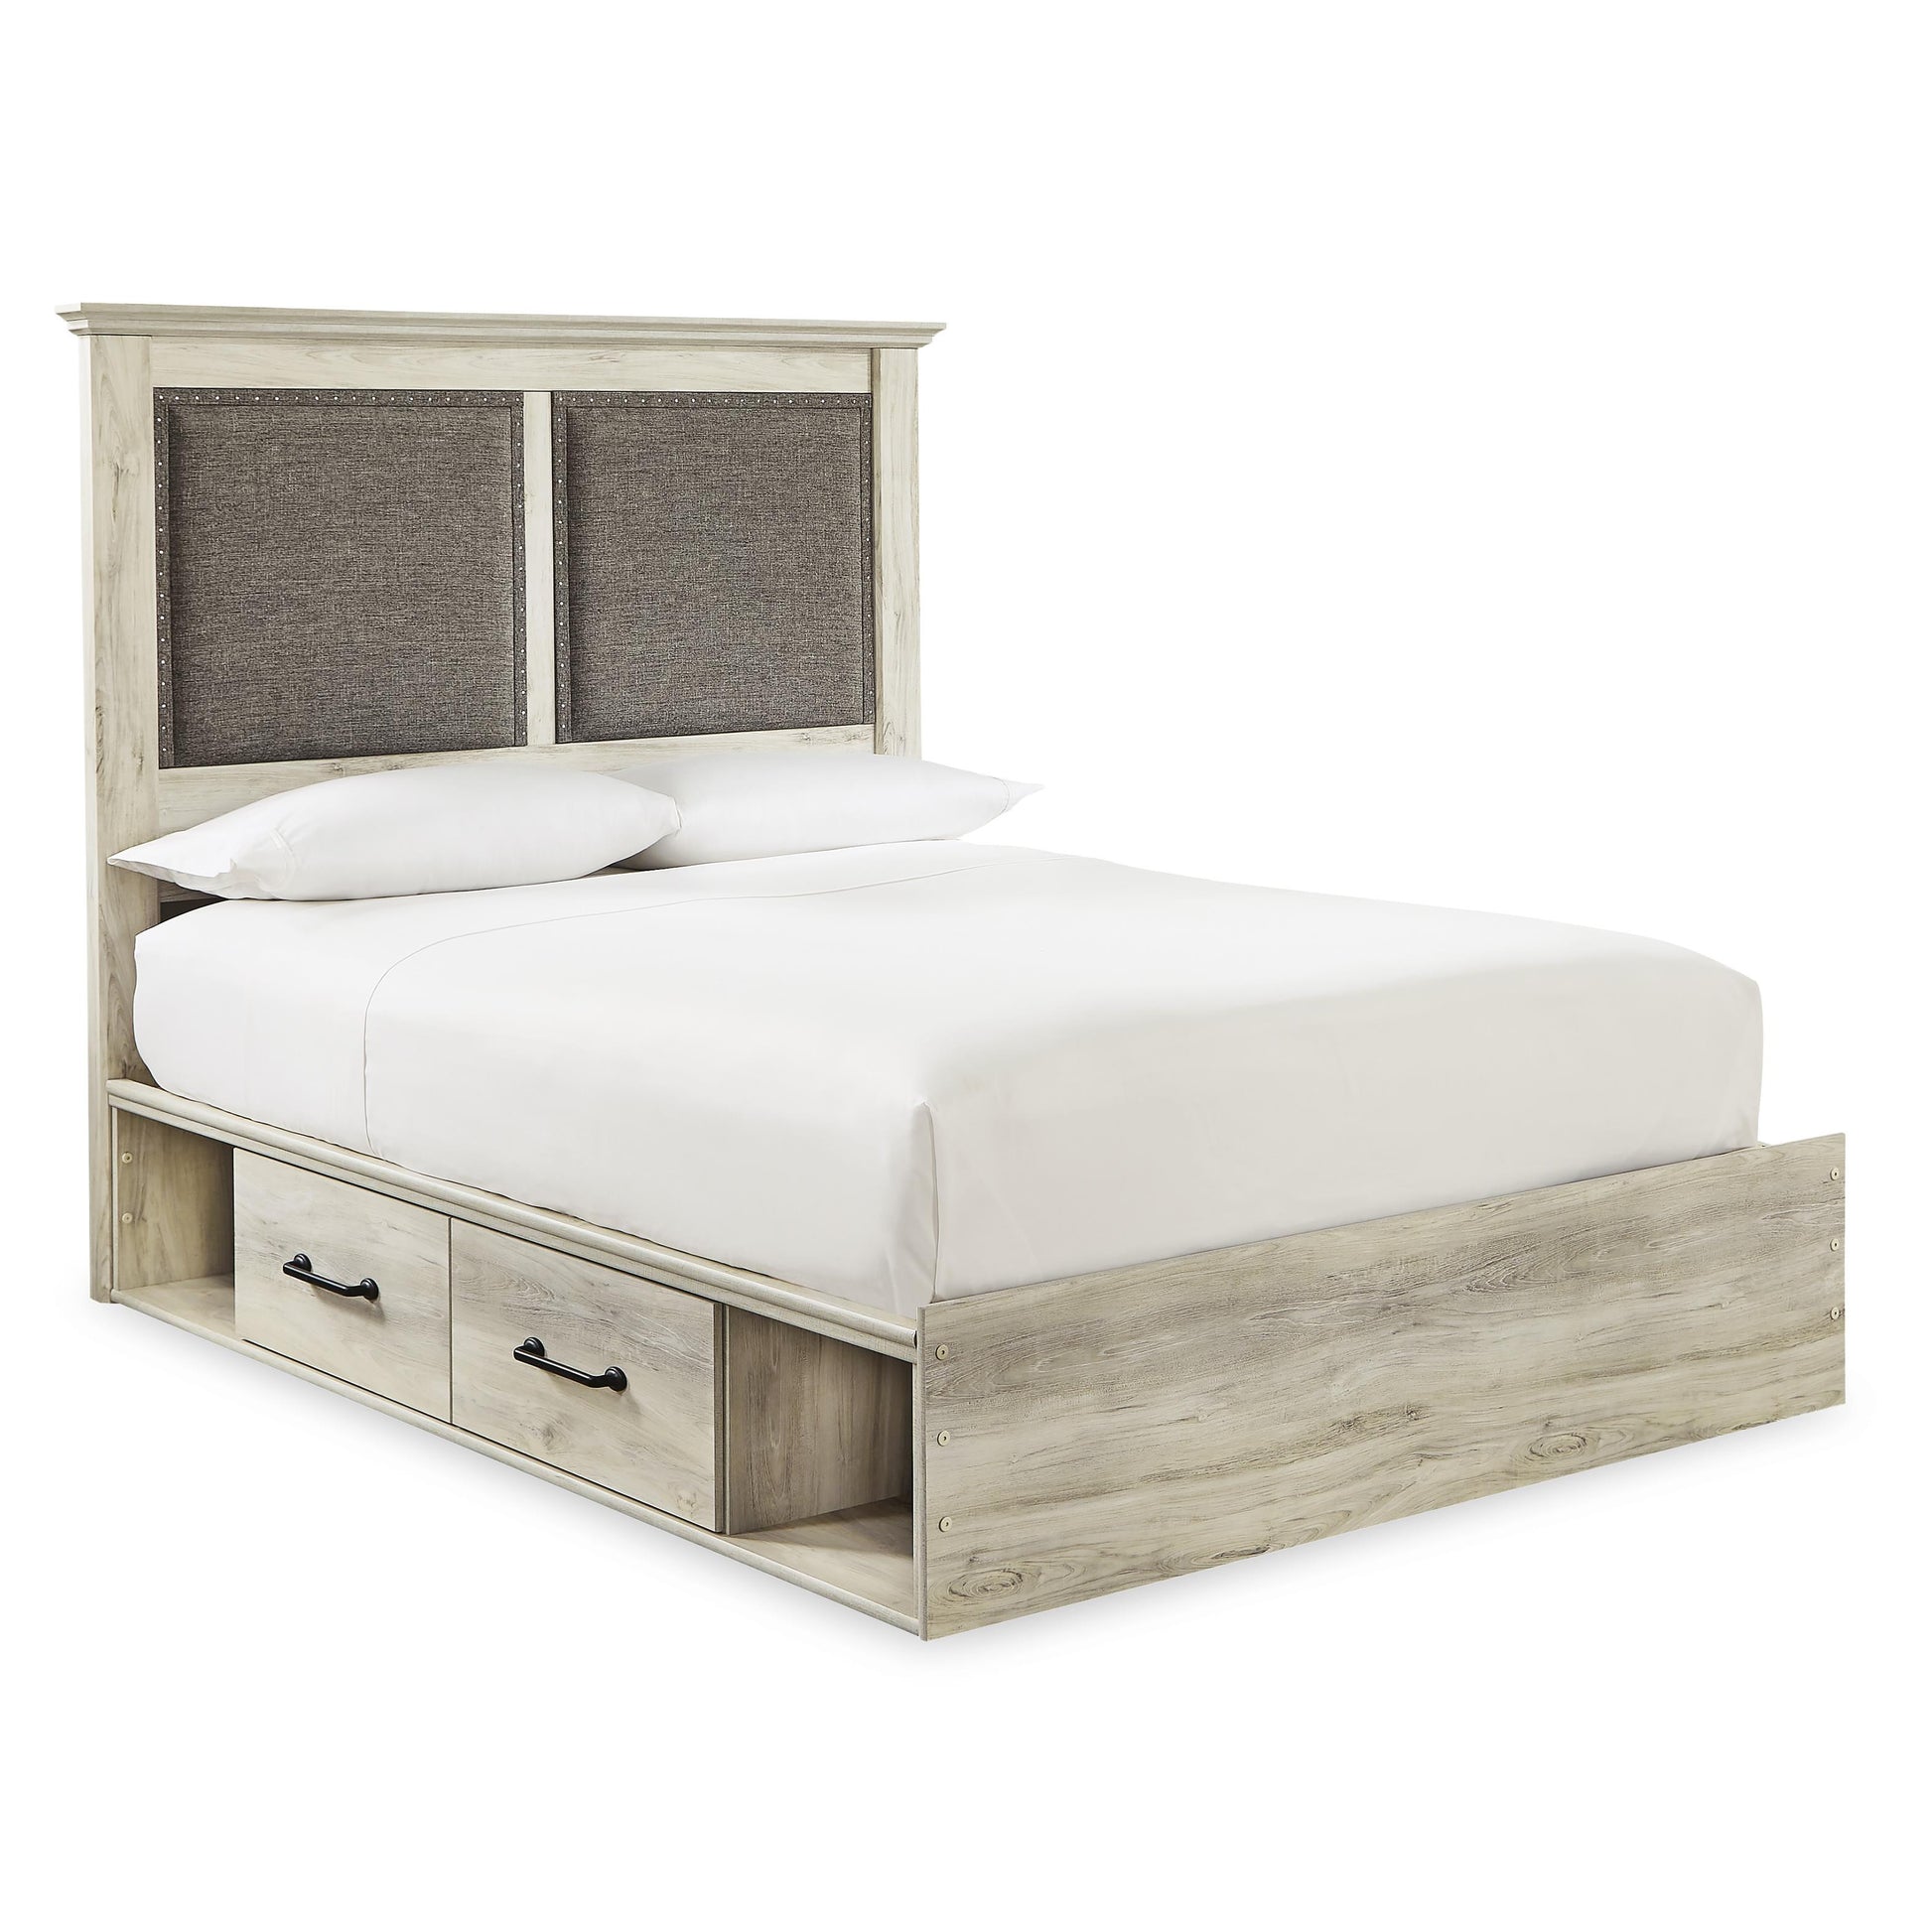 Signature Design by Ashley Cambeck Queen Upholstered Panel Bed with Storage B192-157/B192-54/B192-160/B100-13 IMAGE 1